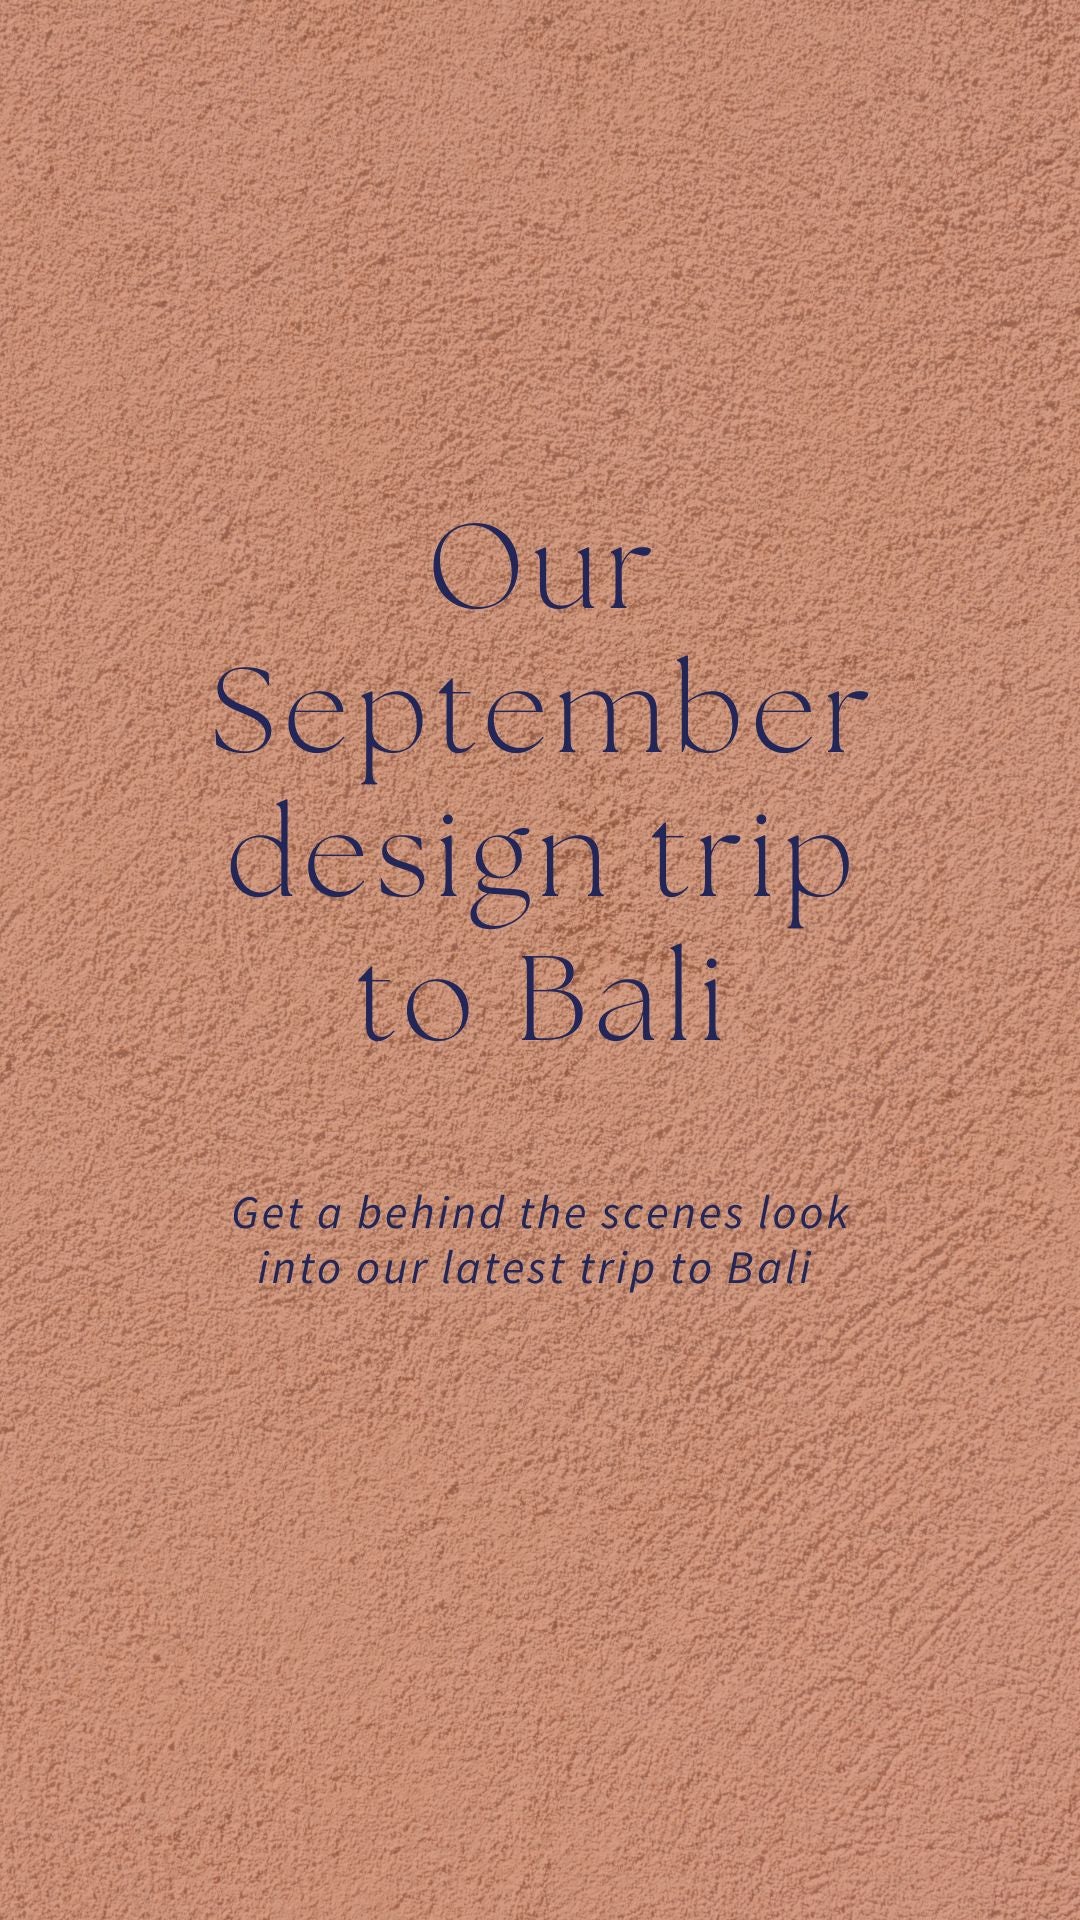 Our September Design Trip to Bali